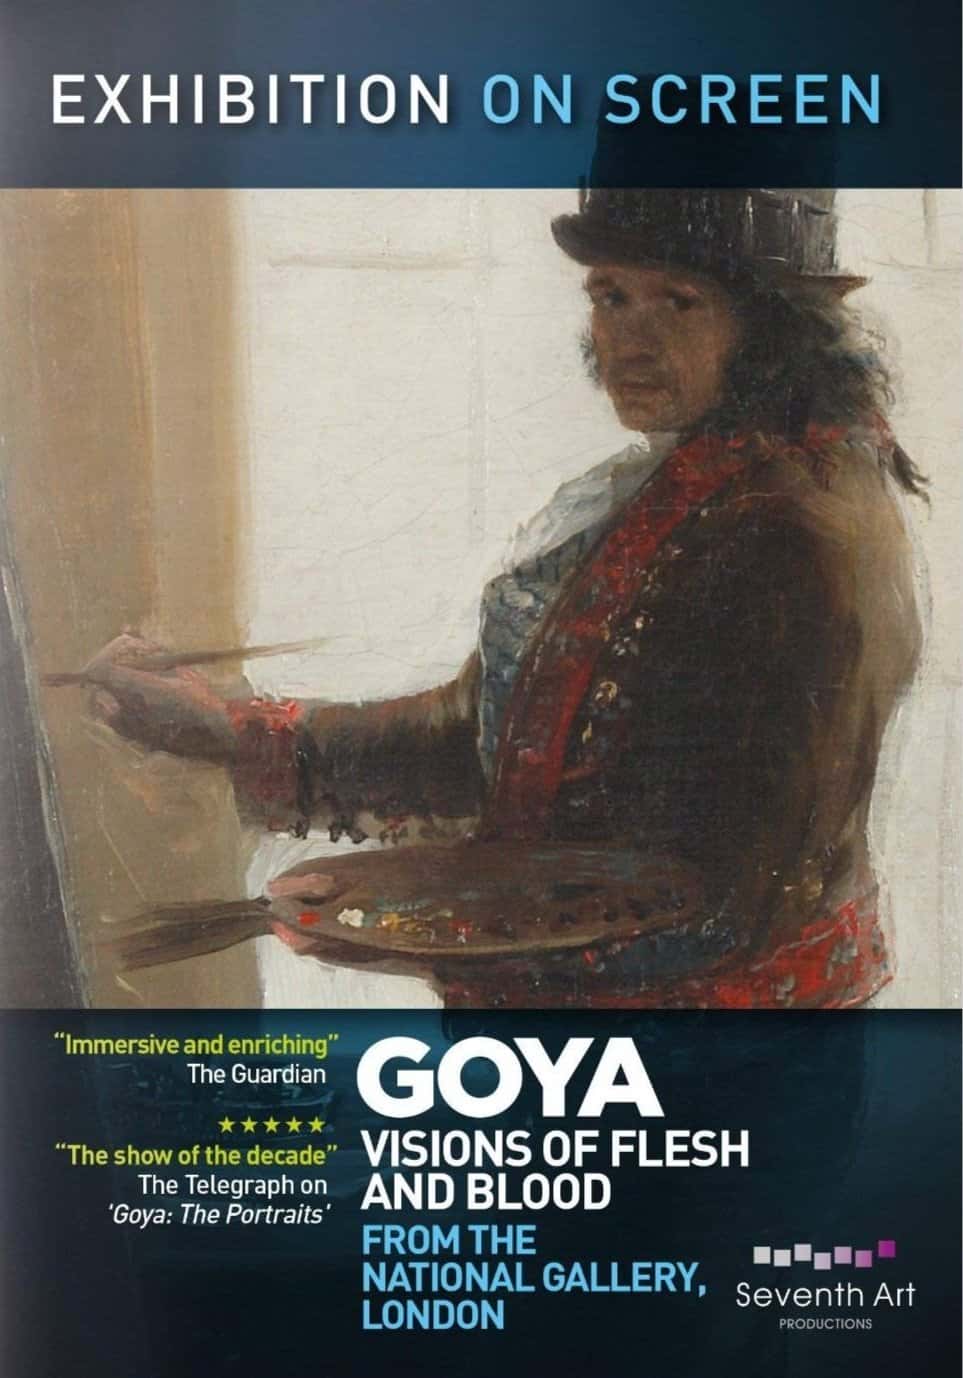 Exhibition On Screen: Goya Visions of Flesh and Blood